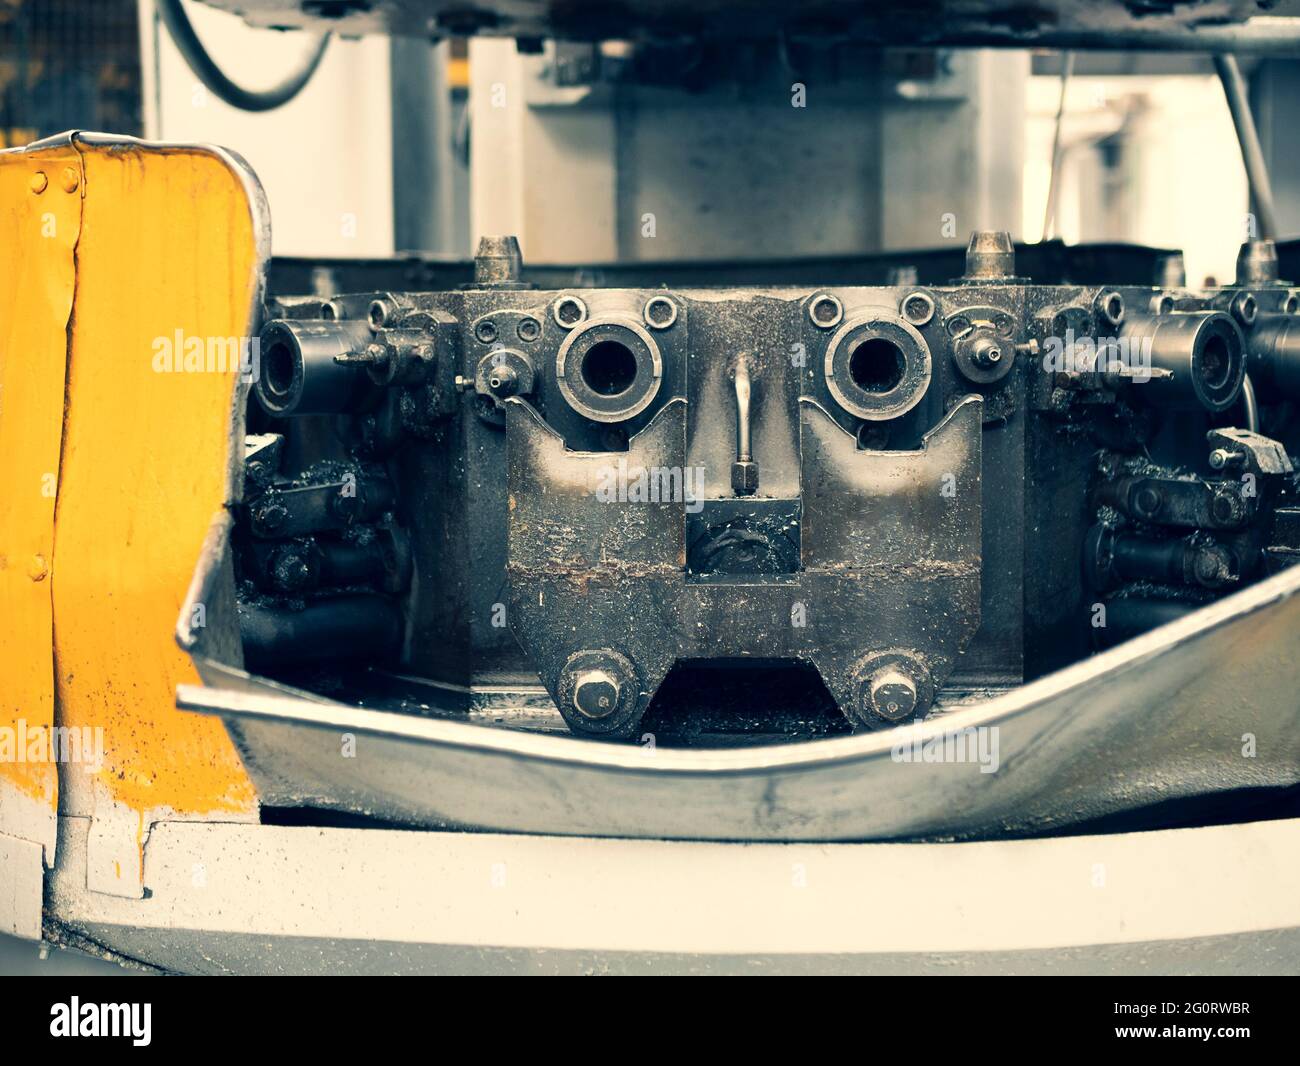 Detail of upright drilling machine resembling robot face, close up Stock Photo